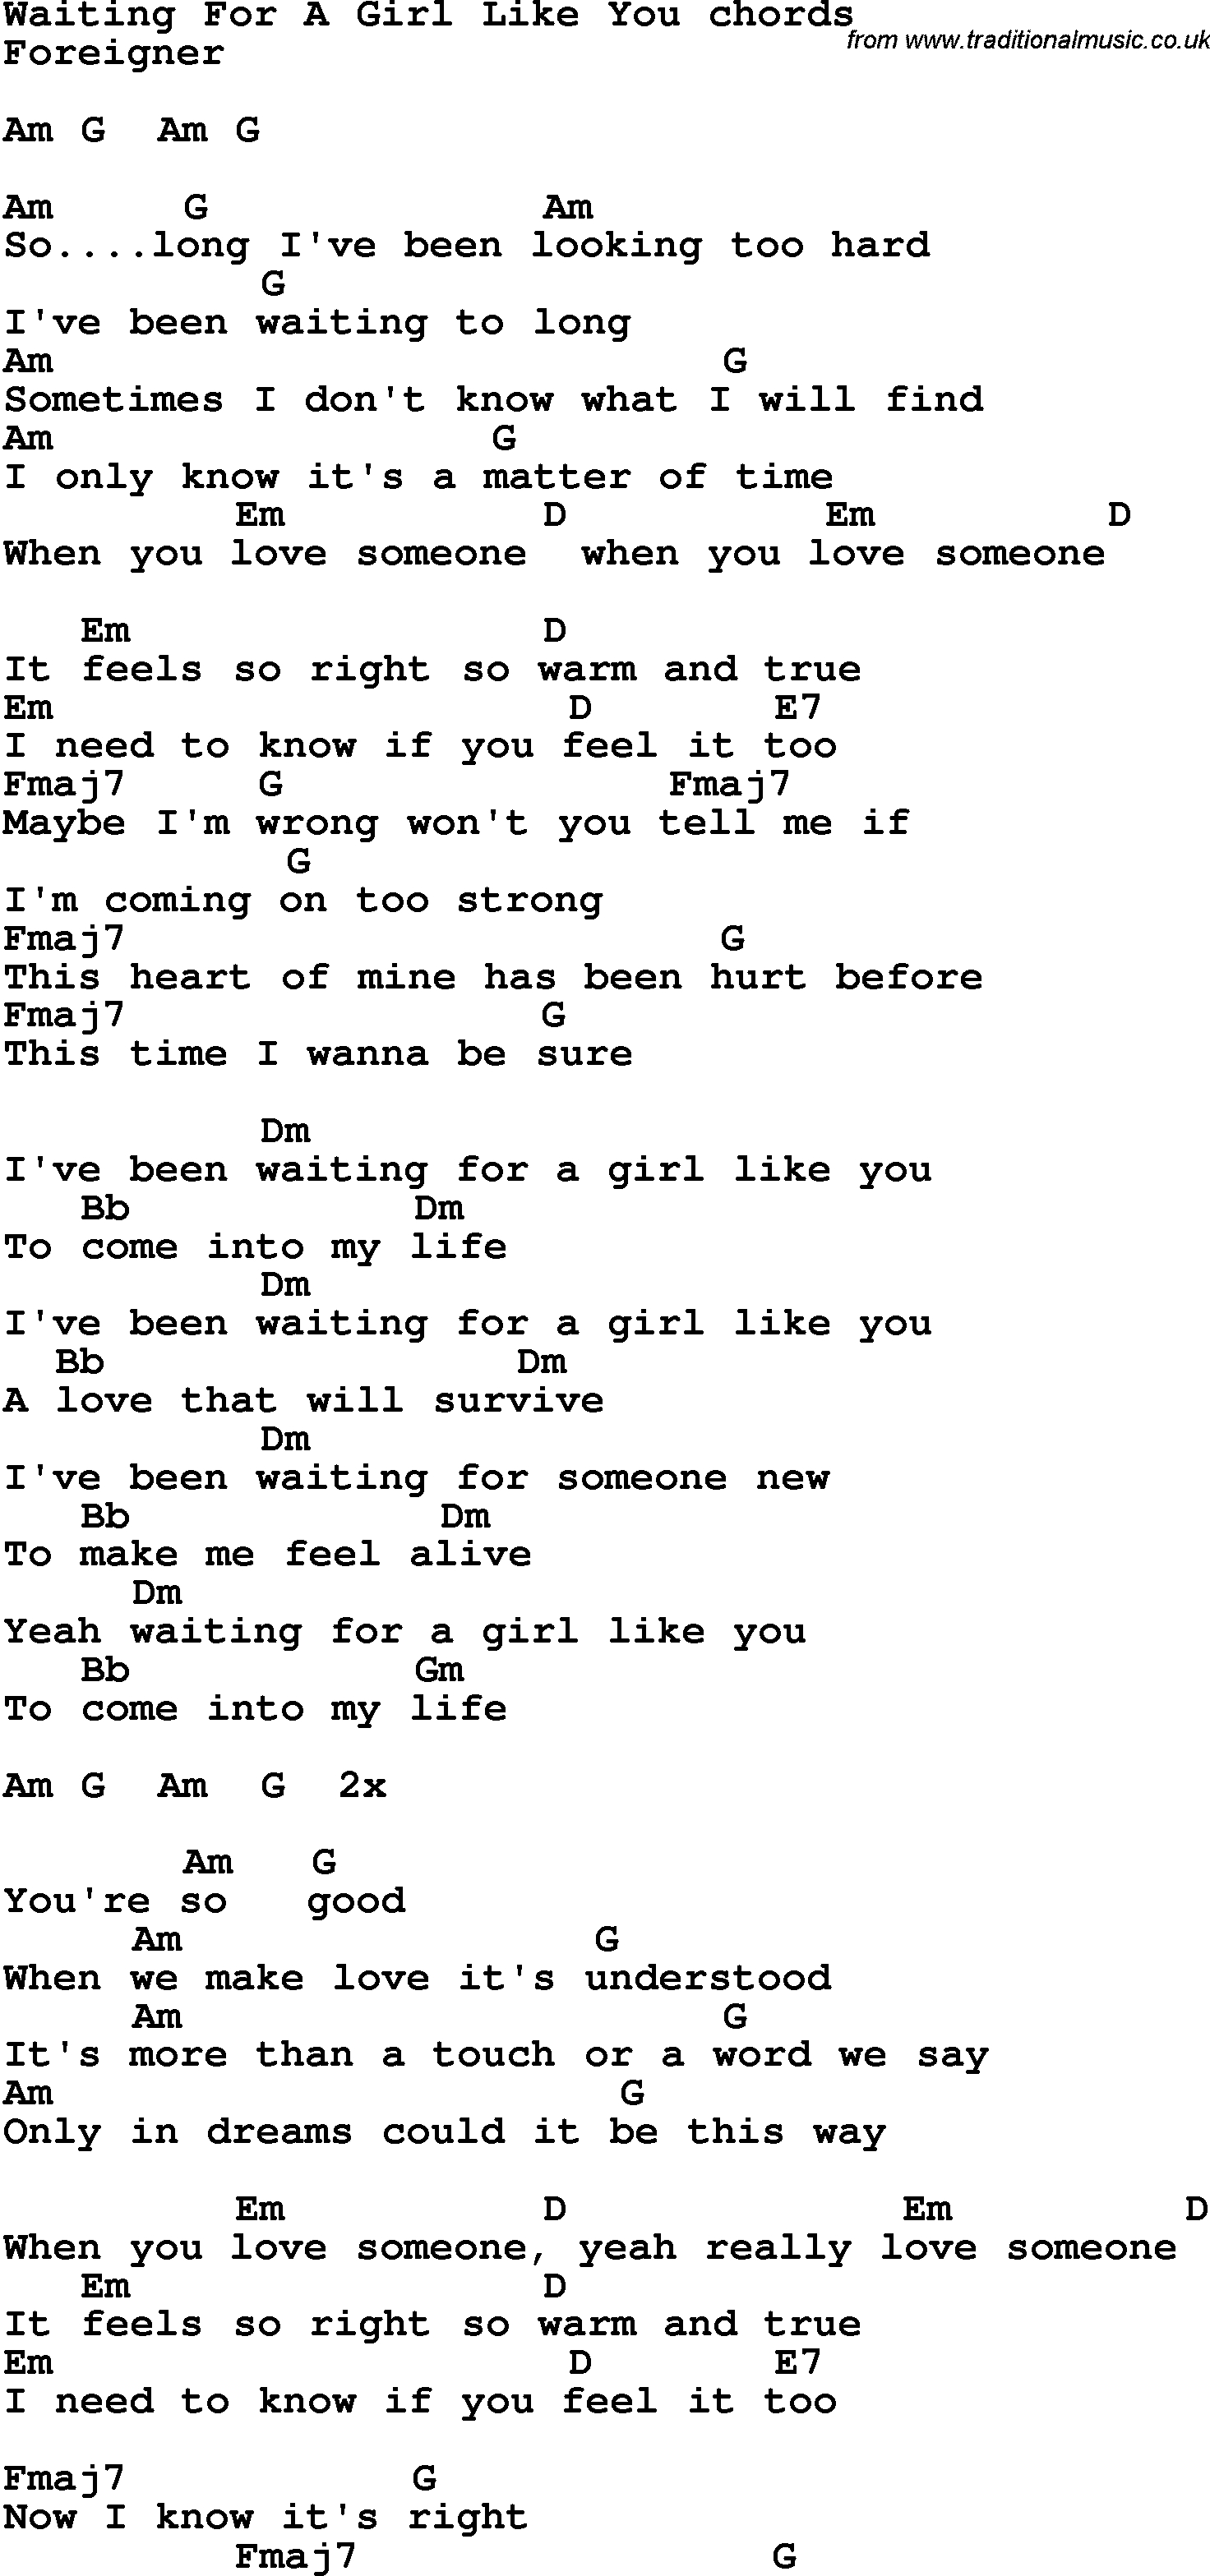 Someone Like You Chords Song Lyrics With Guitar Chords For Waiting For A Girl Like You